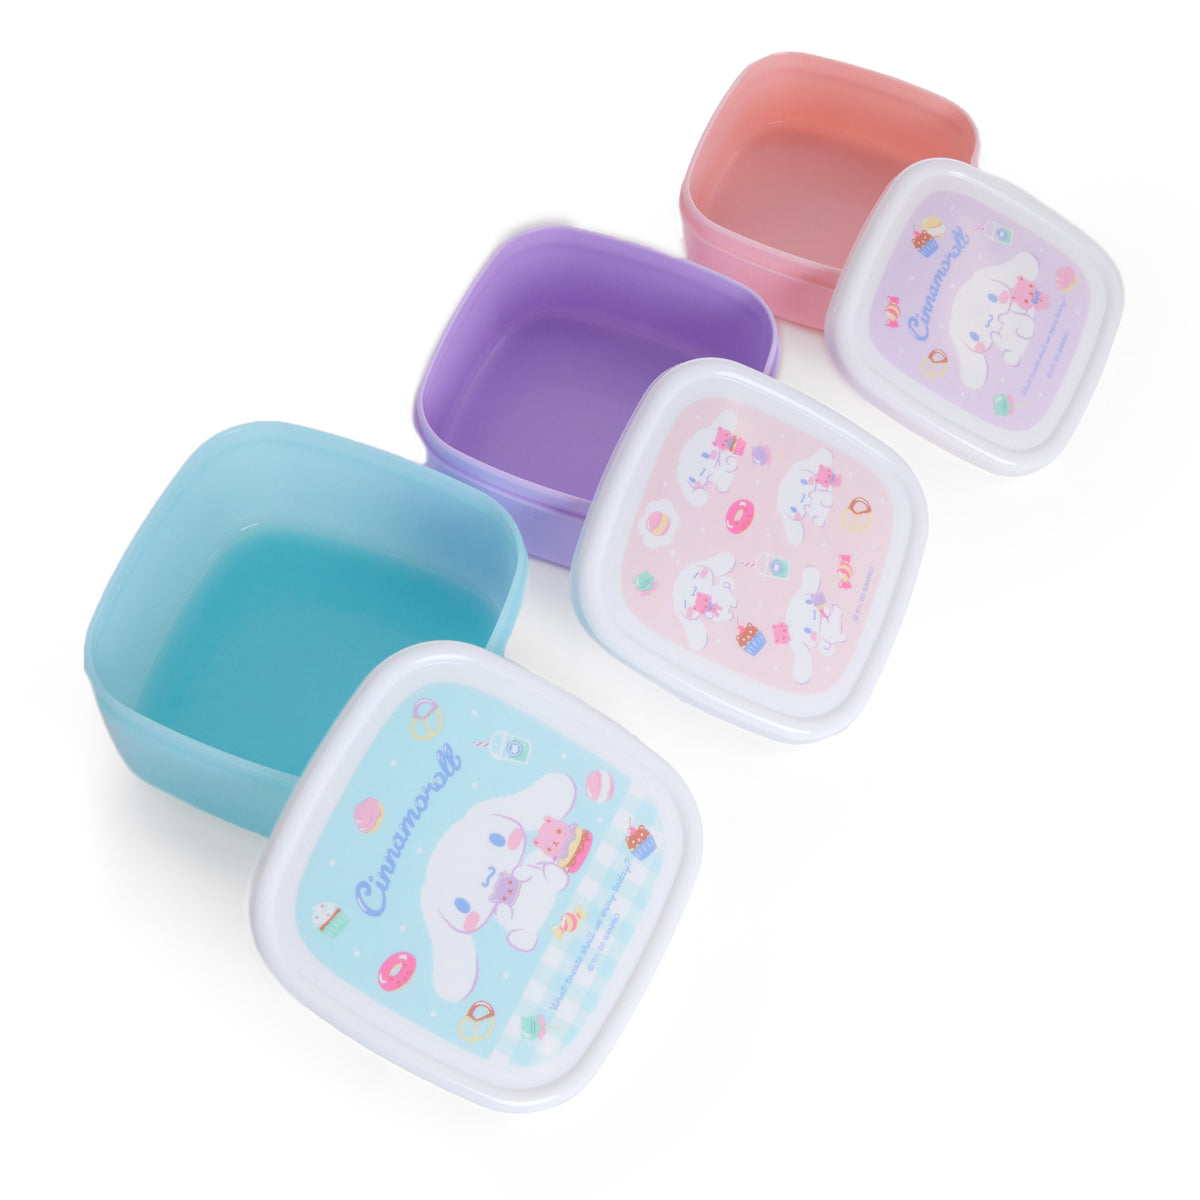 Cinnamoroll 3-Piece Storage Containers (Sweets Series) Kitchen Sanrio   